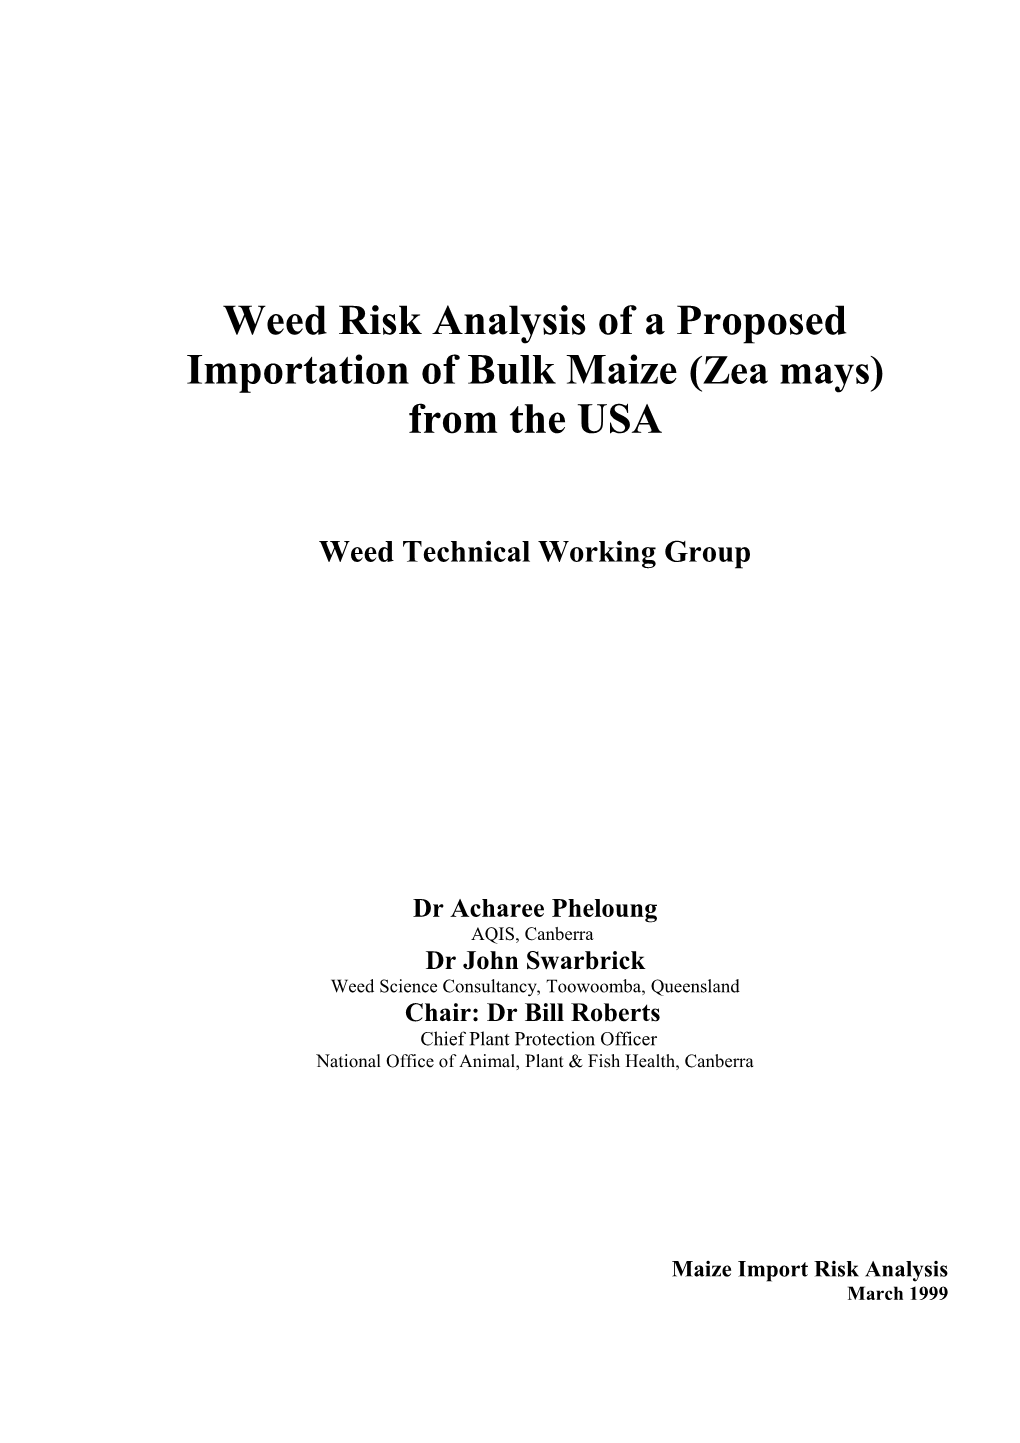 Weed Risk Analysis of Maize Grain Imported from USA